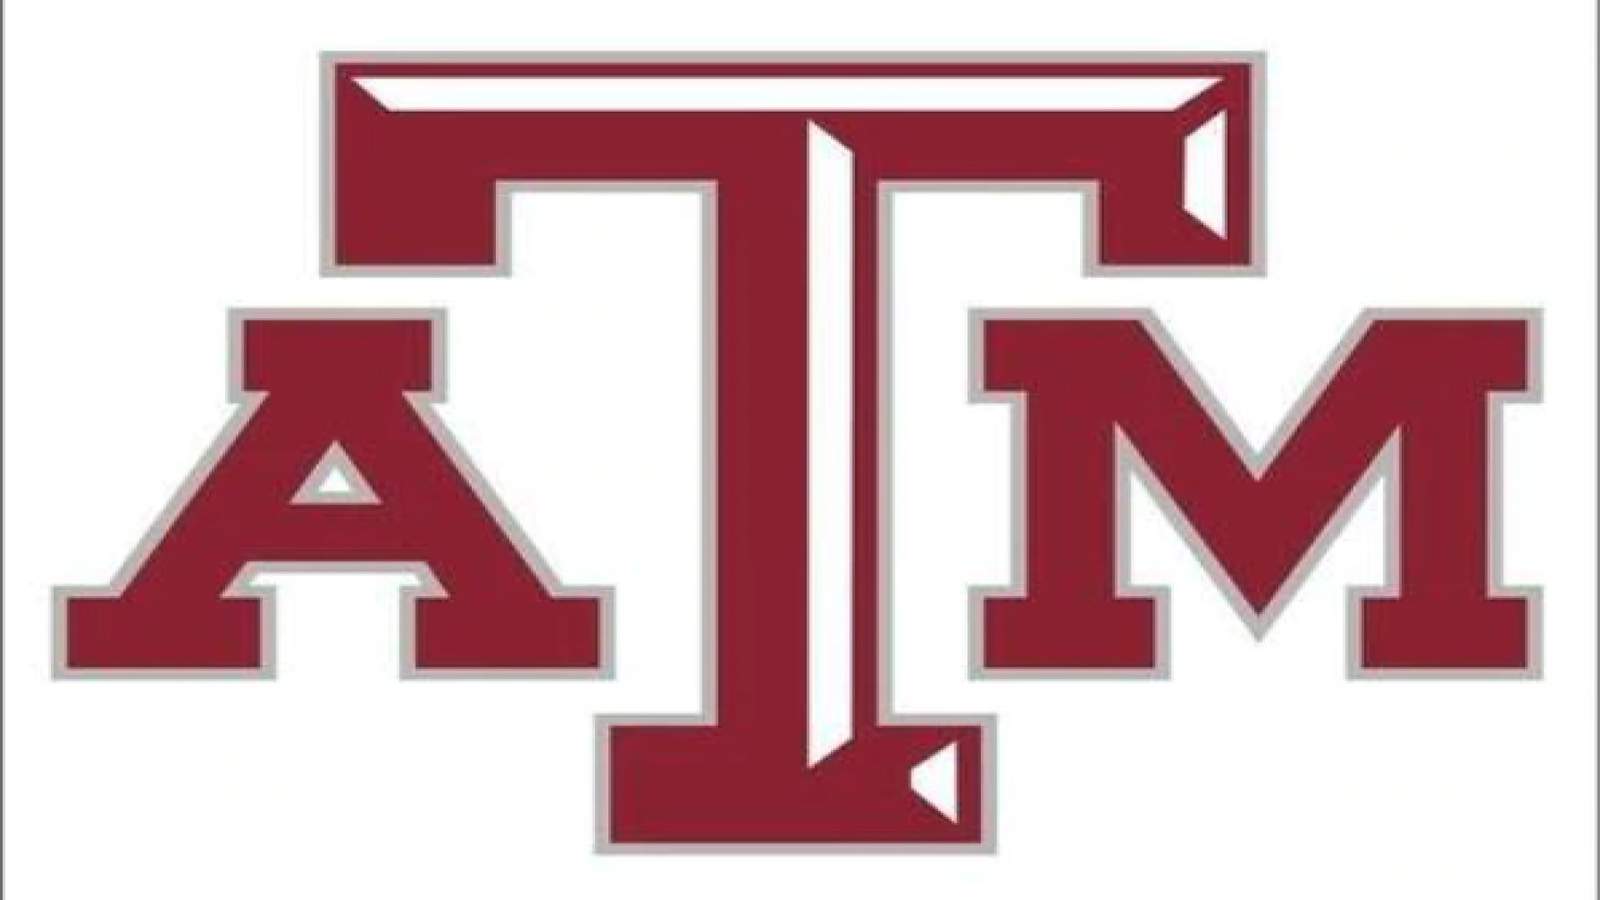 No. 11 Texas A&M beats Mississippi State 28-14